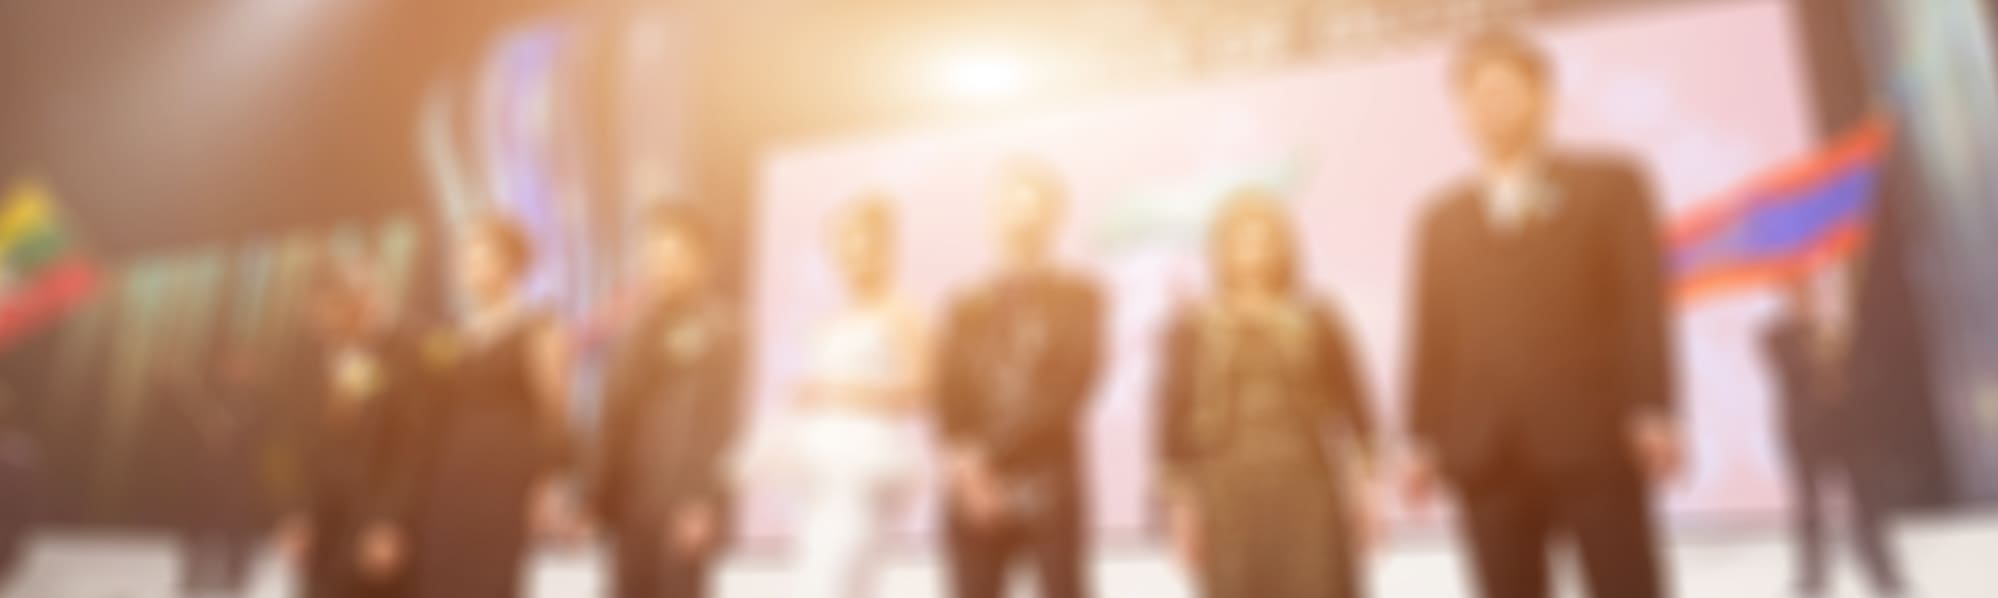 A blurred image of a business award ceremony